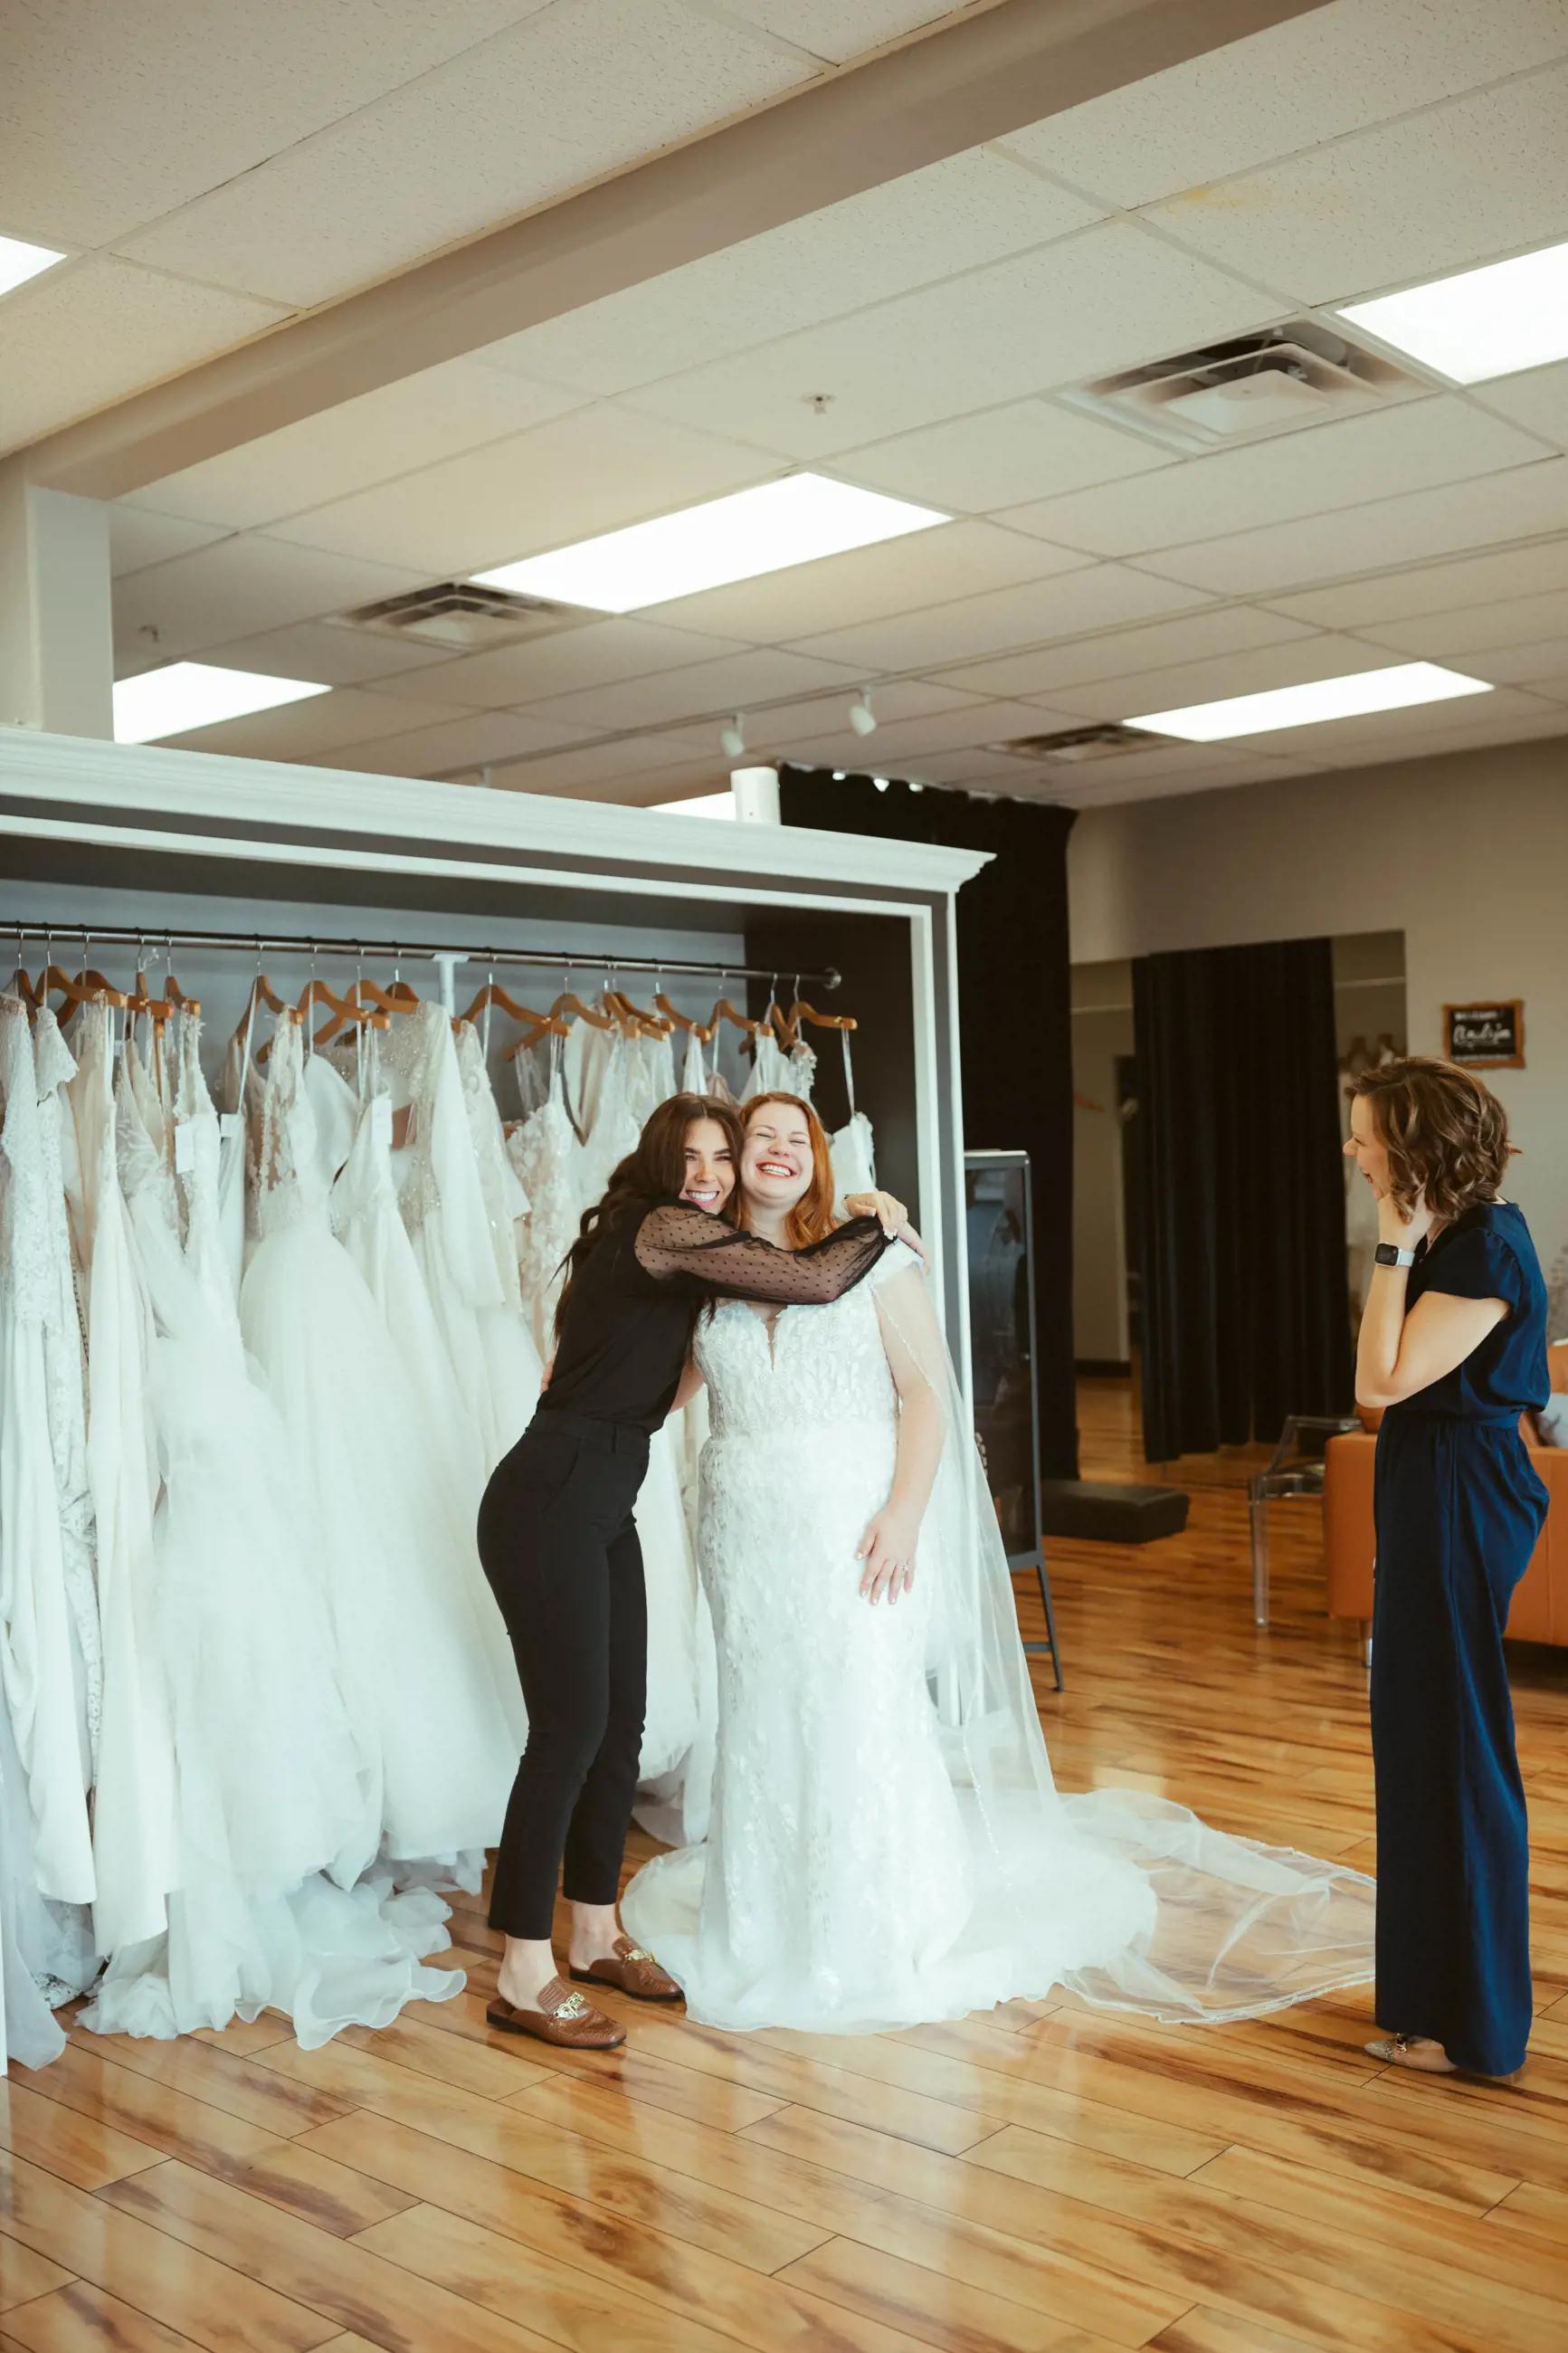 Why You Should Keep an Open Mind While Dress Shopping Image